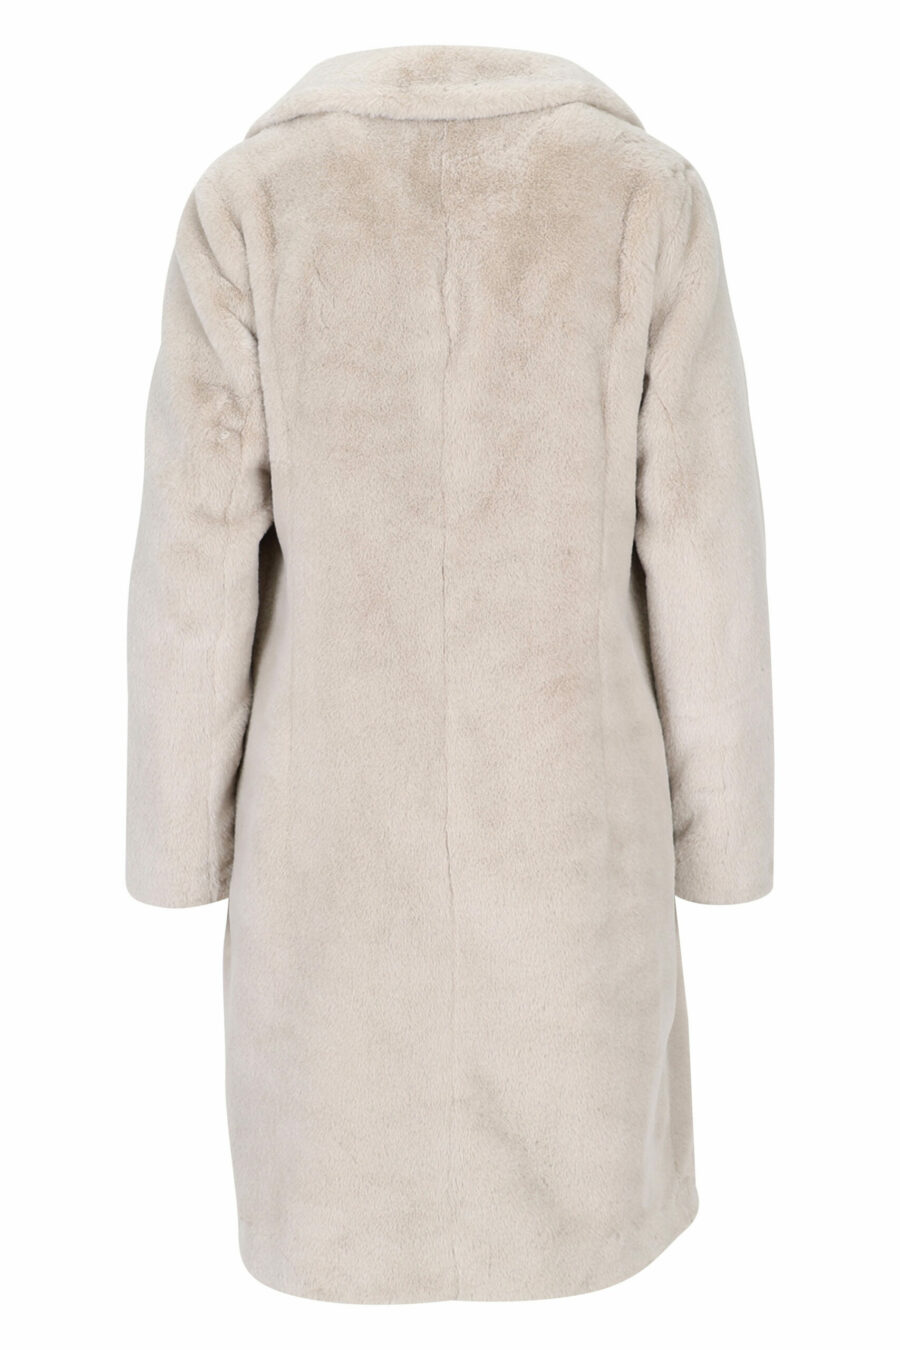 White coat with beaver effect faux fur and monogrammed lining - 8055721649603 2 scaled